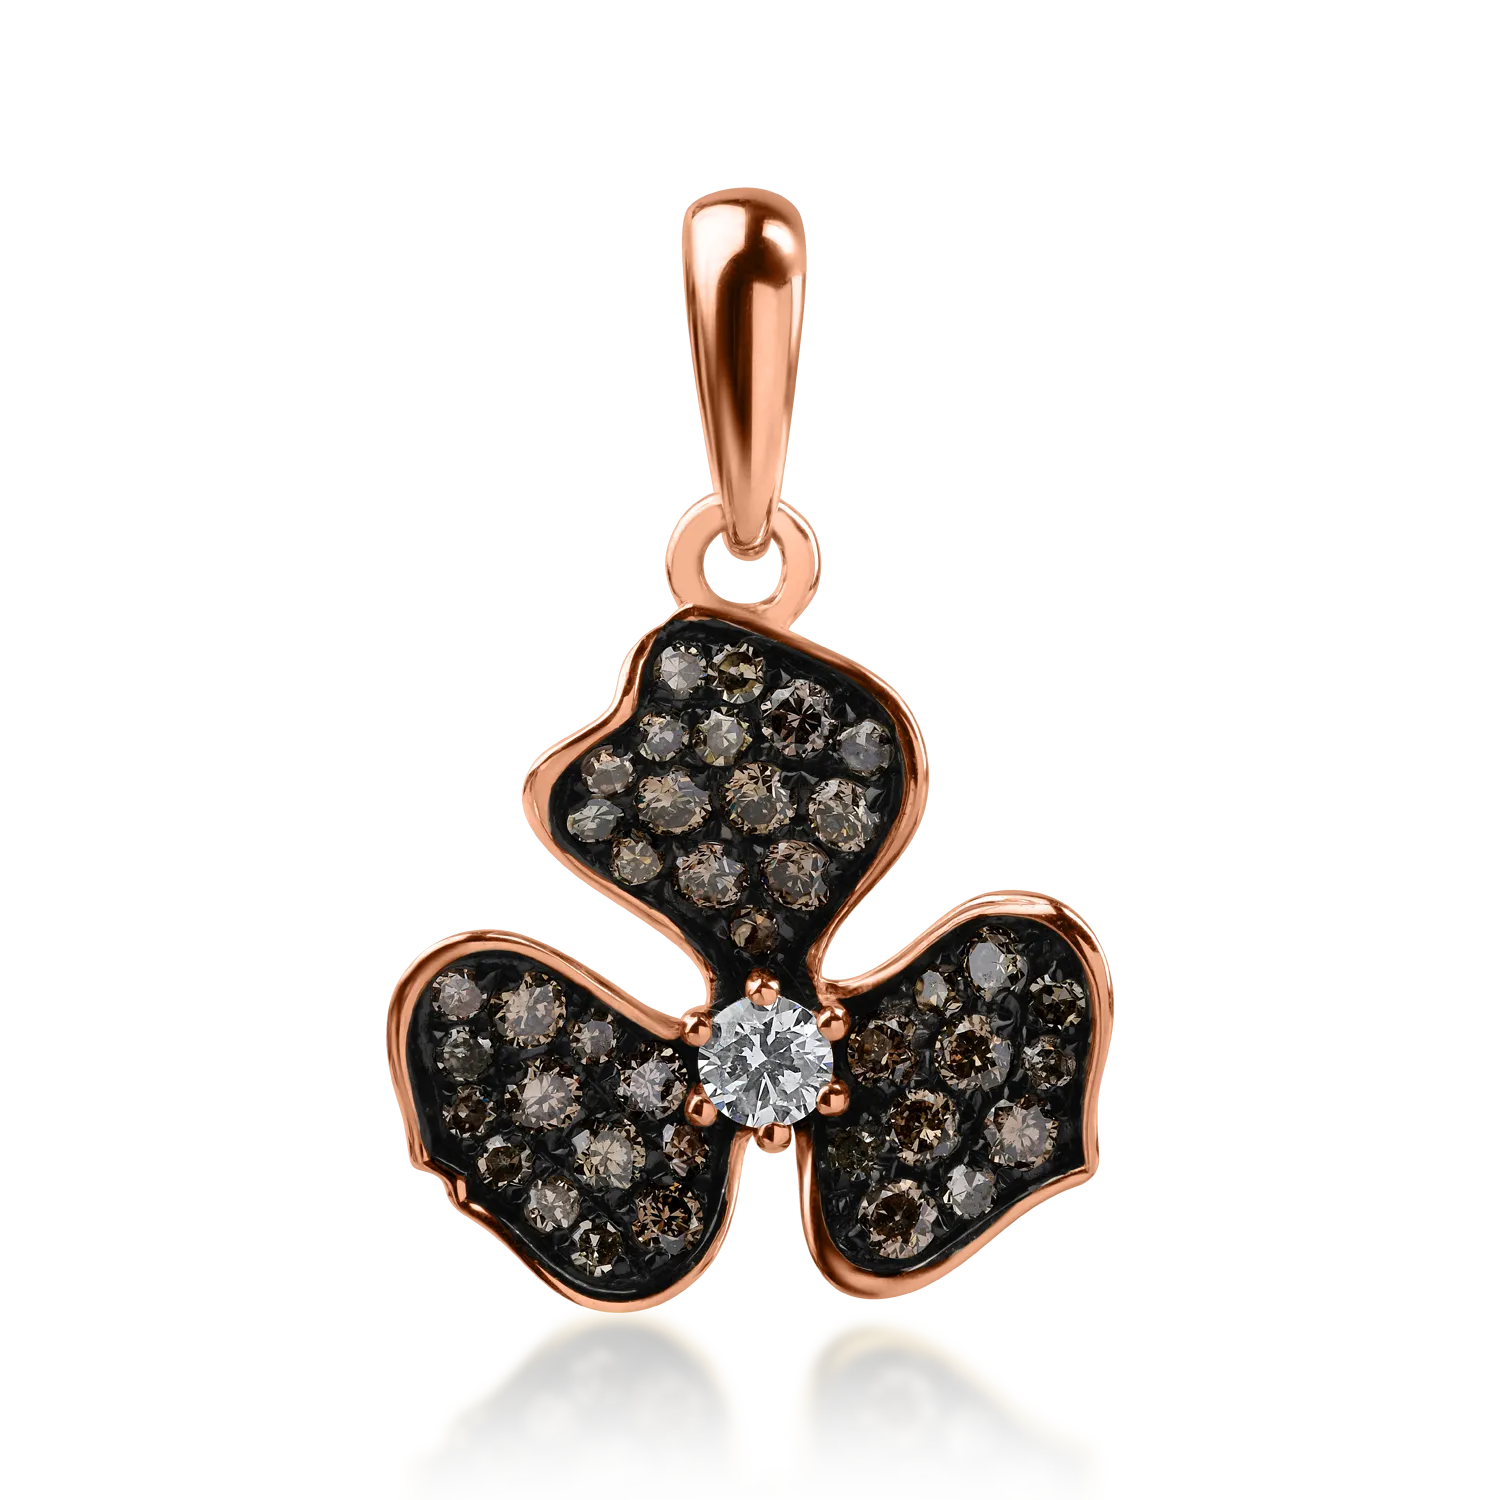 Rose gold flower pendant with 0.062ct diamond and 0.356ct brown diamonds